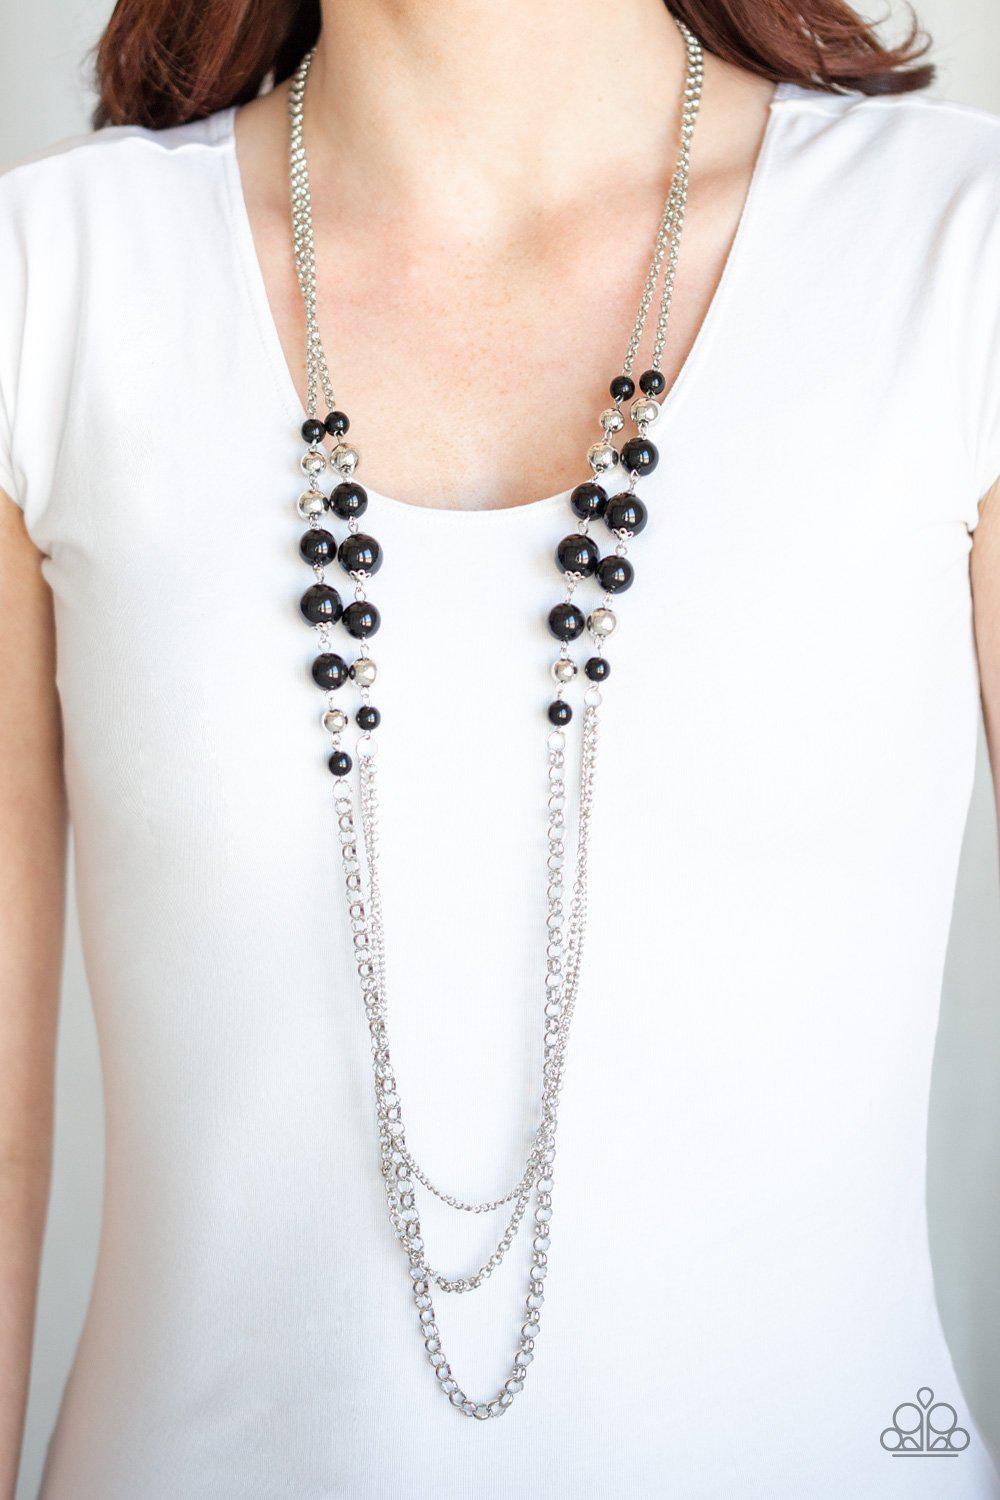 Charmingly Colorful Black and Silver Necklace - Paparazzi Accessories-CarasShop.com - $5 Jewelry by Cara Jewels